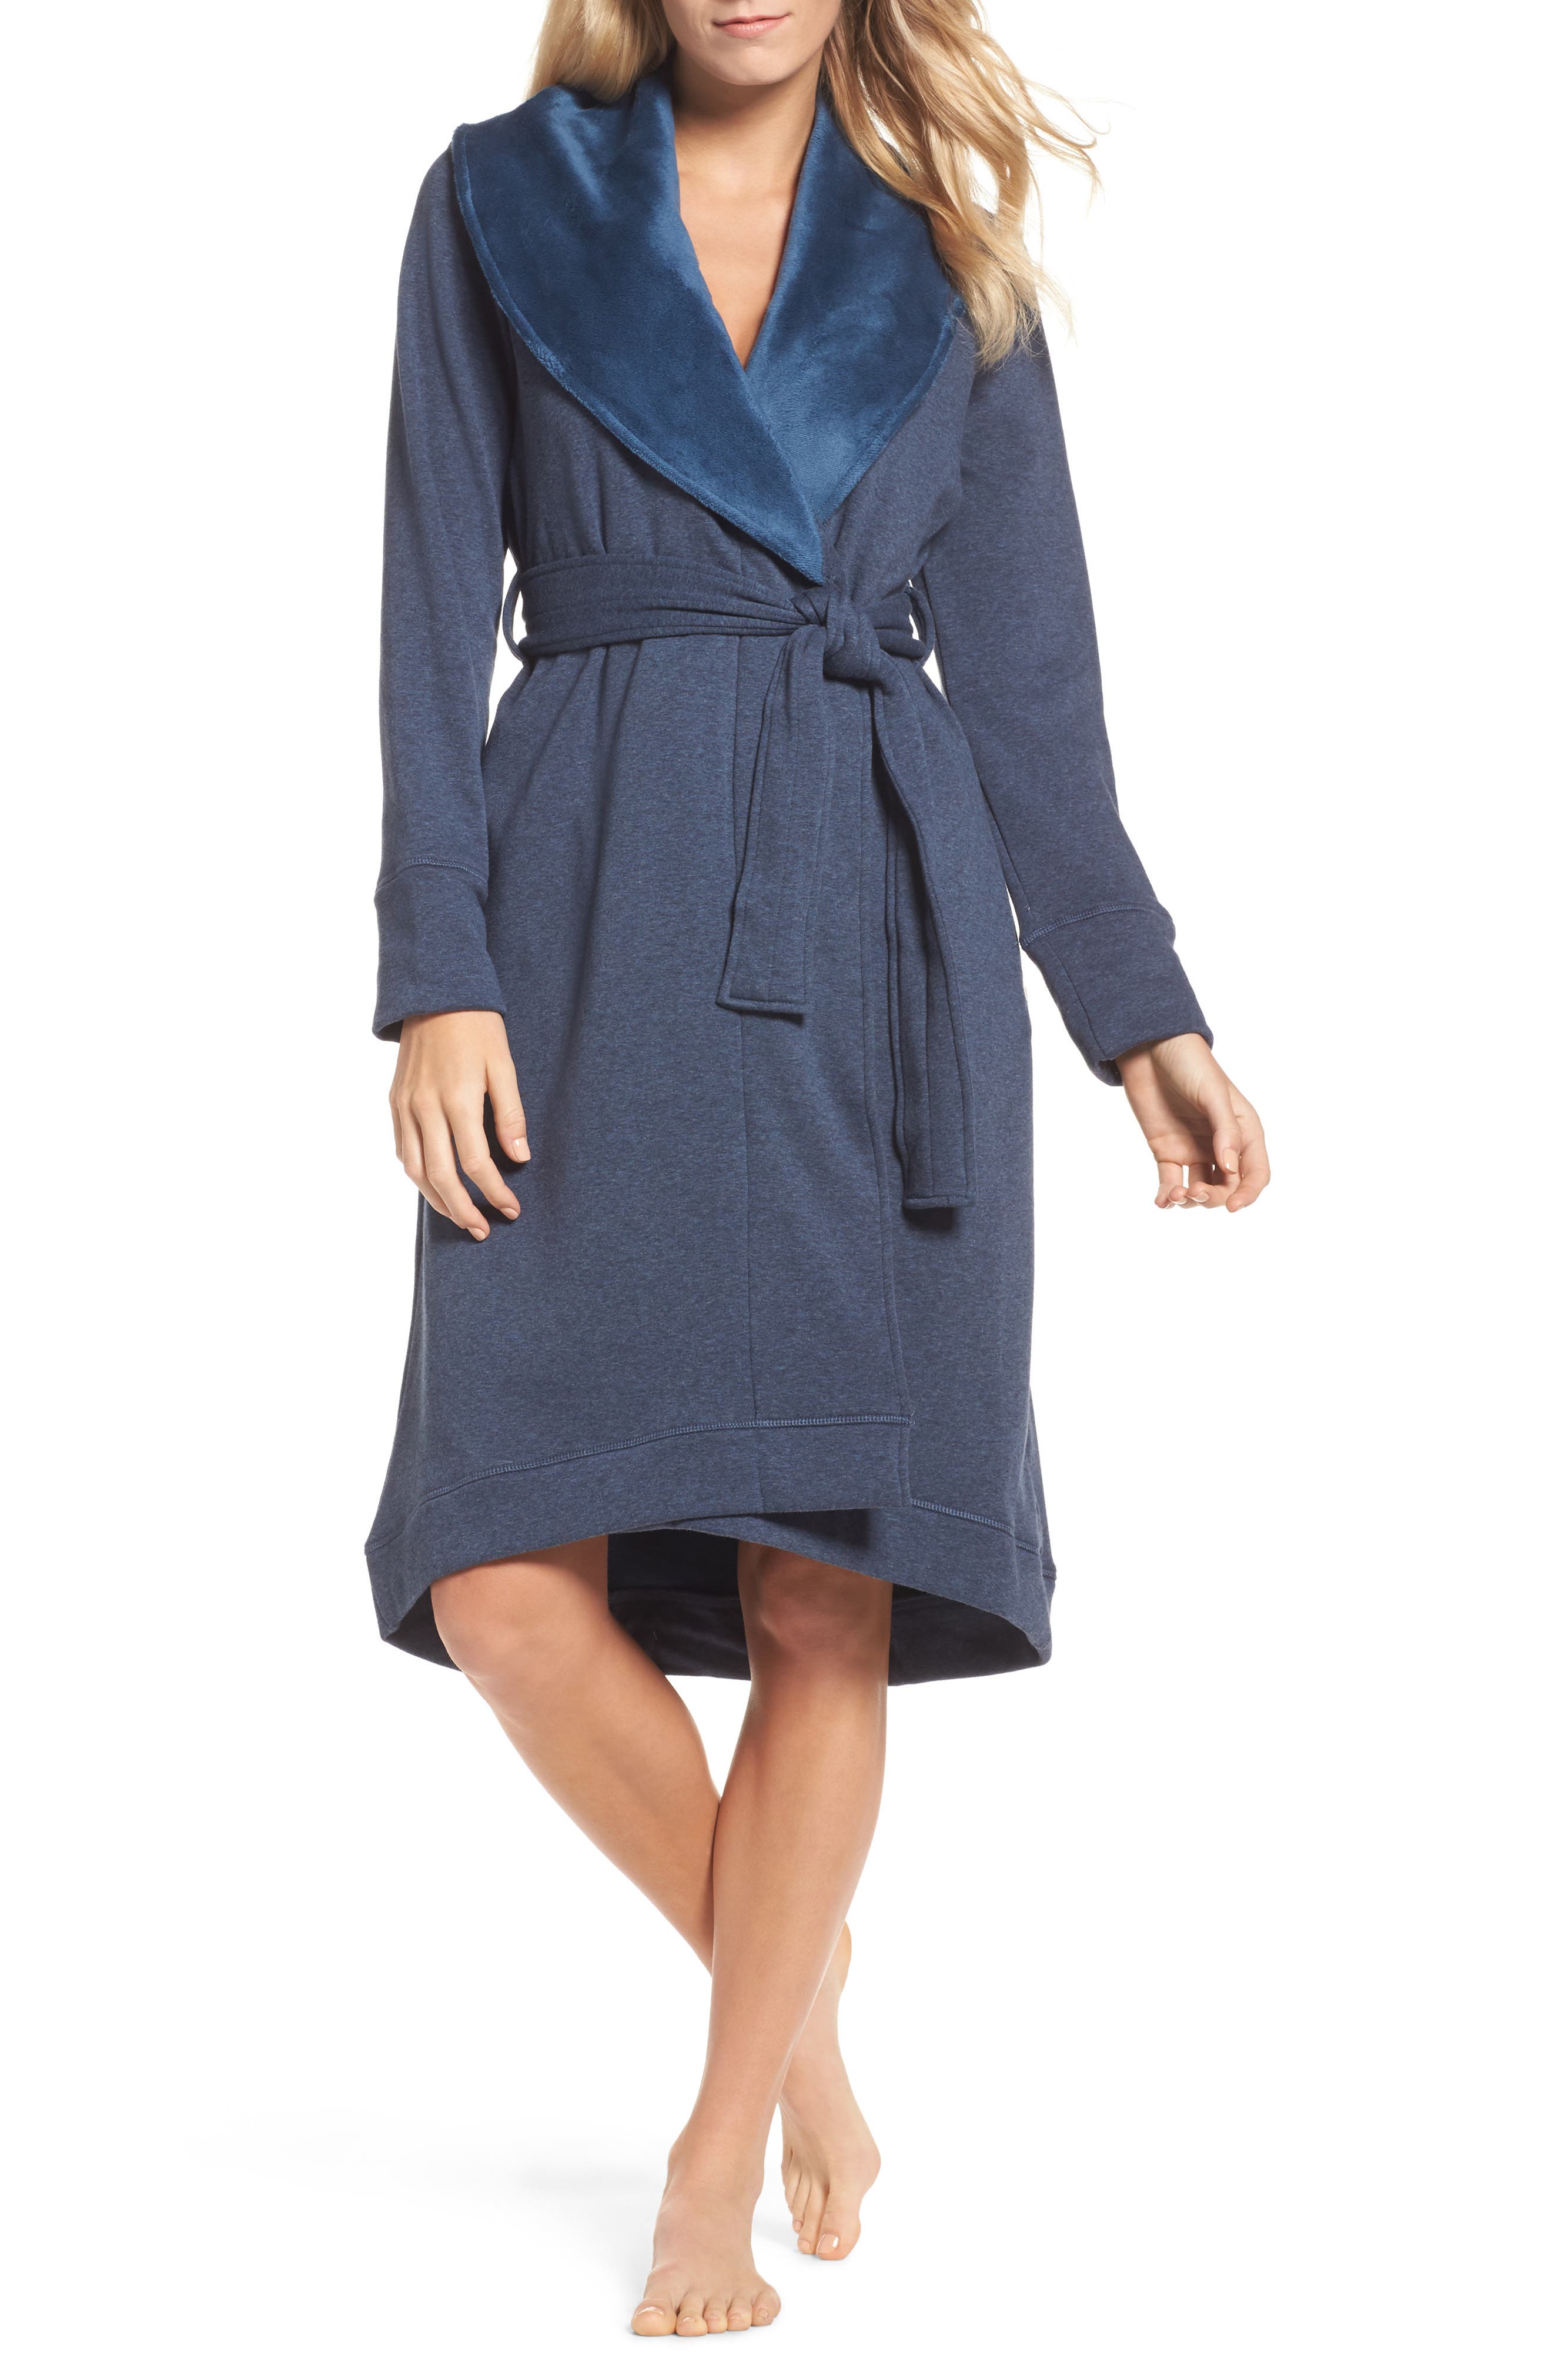 ugg duffield double knit robe